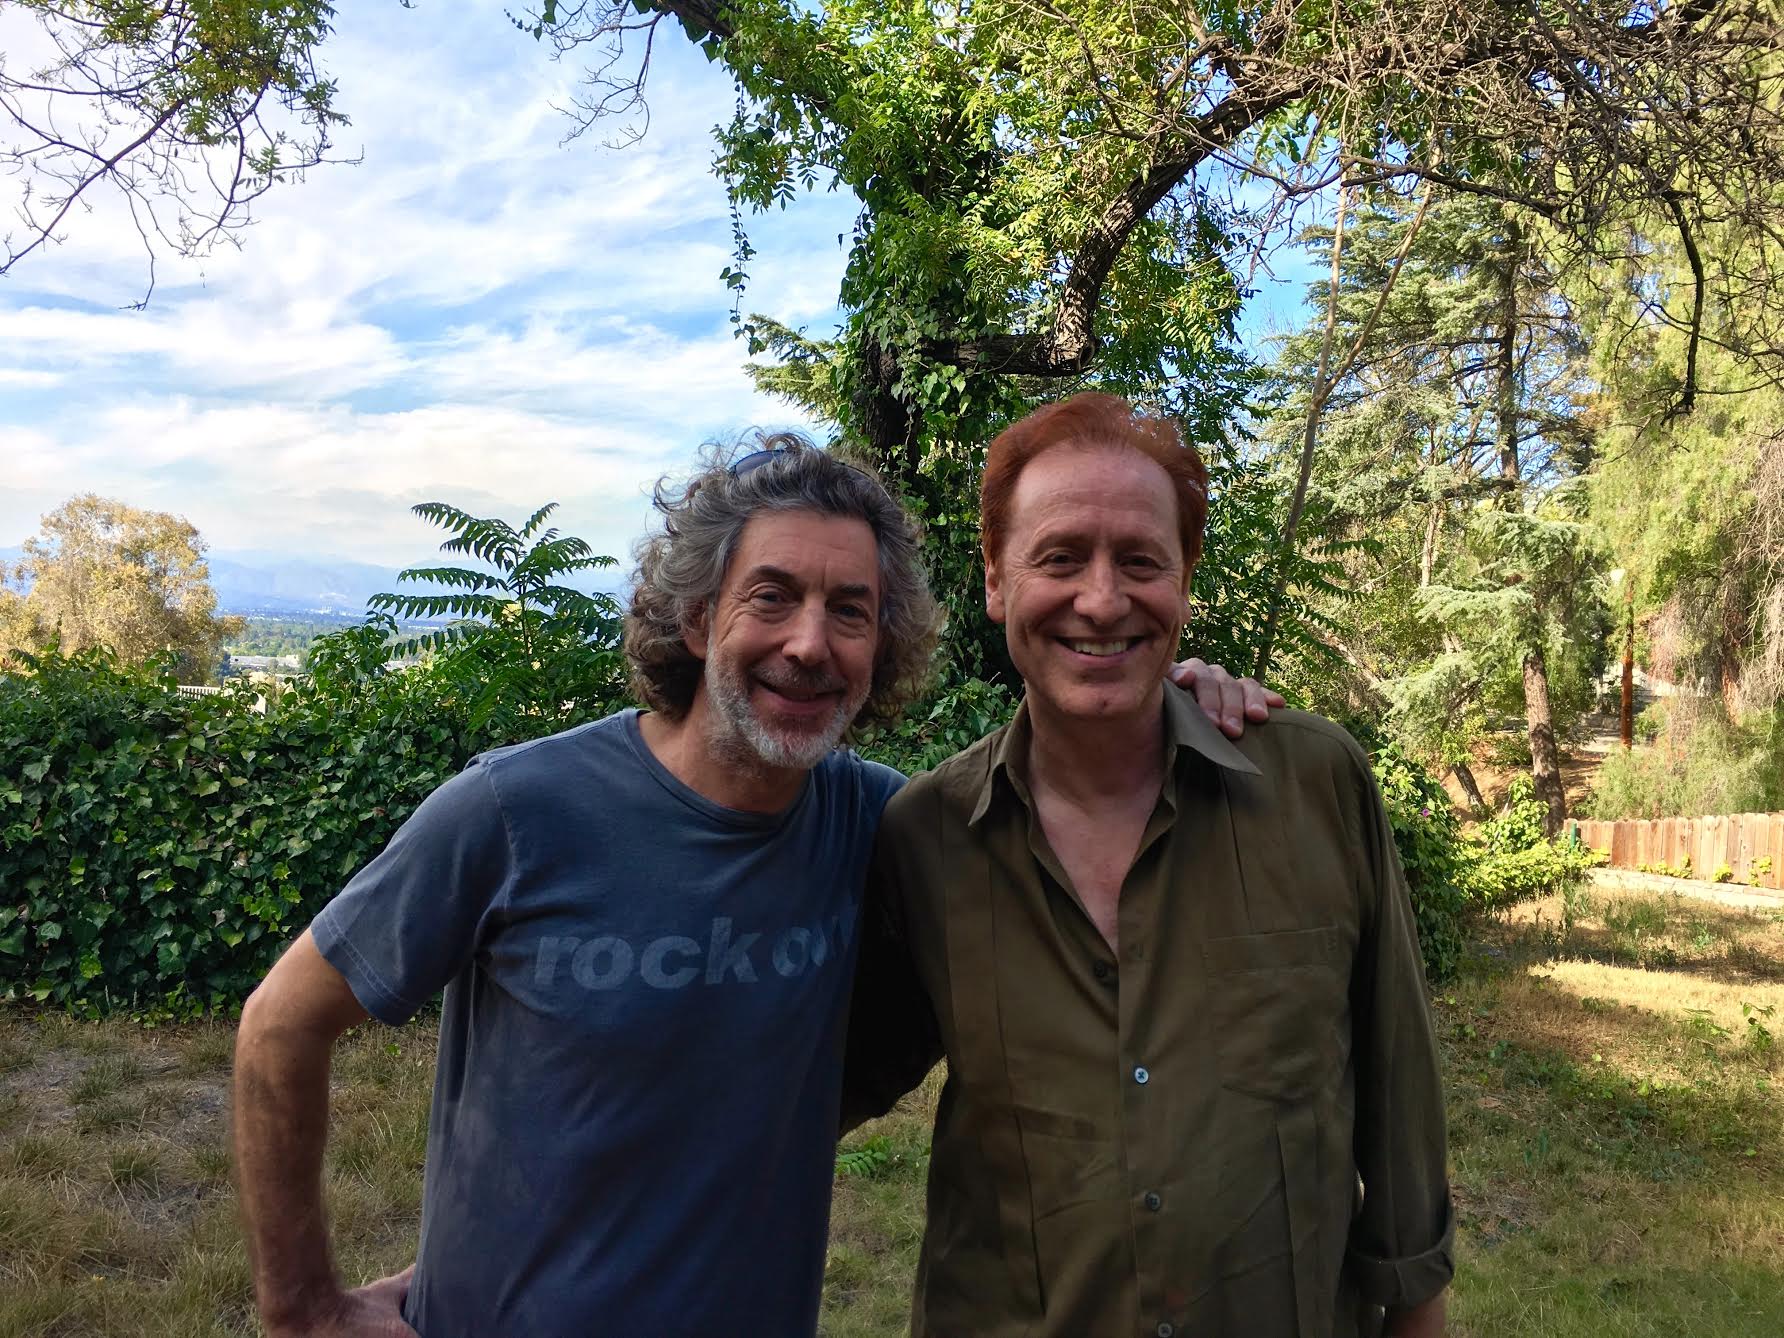 Craig with Simon Phillips, drummer of Toto.